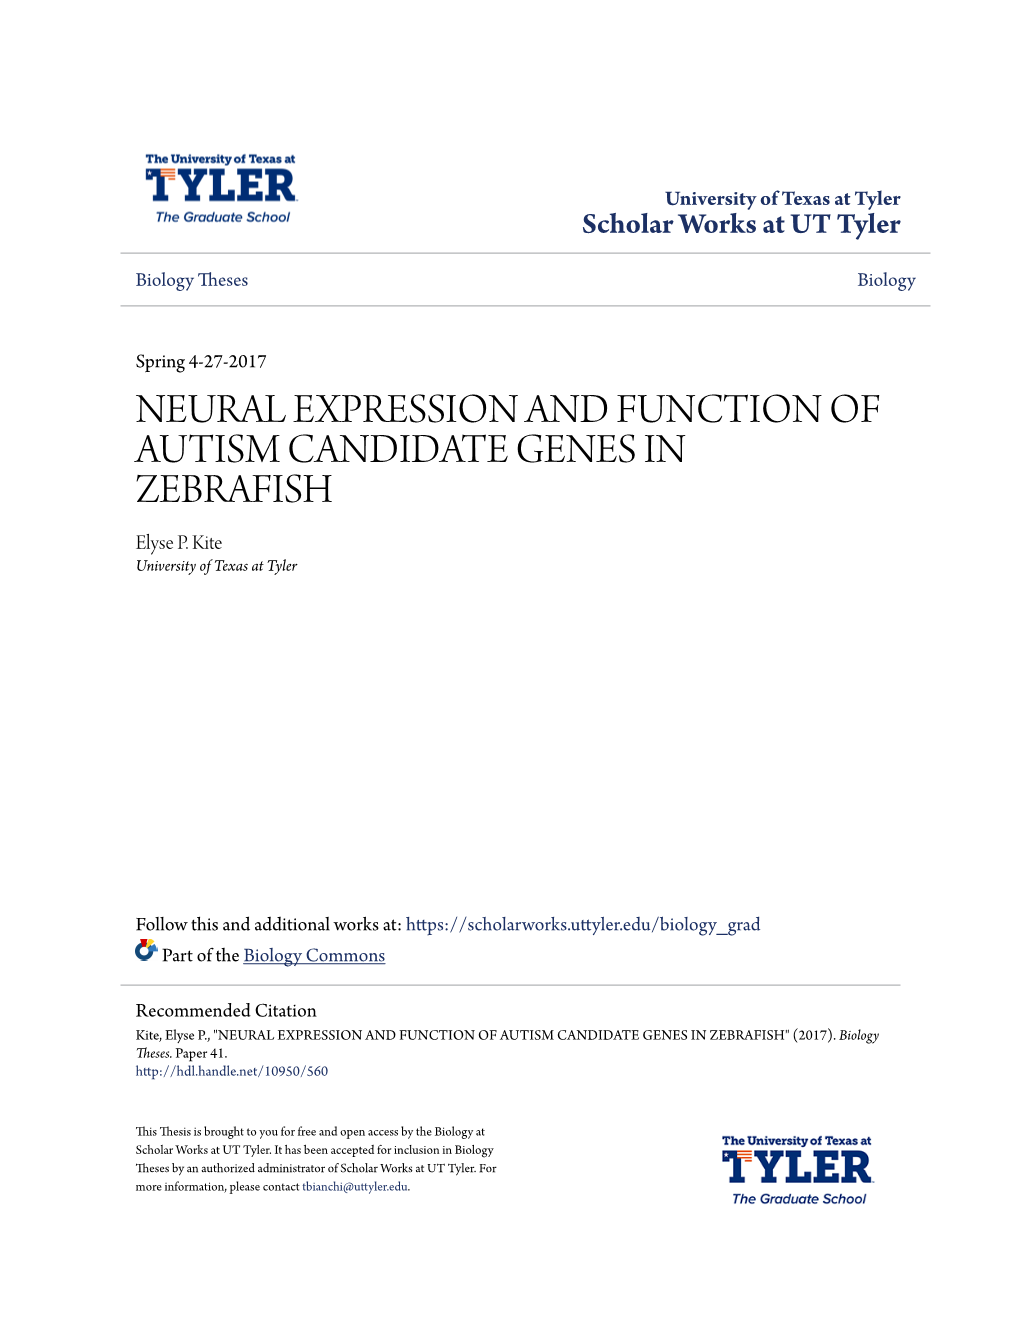 NEURAL EXPRESSION and FUNCTION of AUTISM CANDIDATE GENES in ZEBRAFISH Elyse P